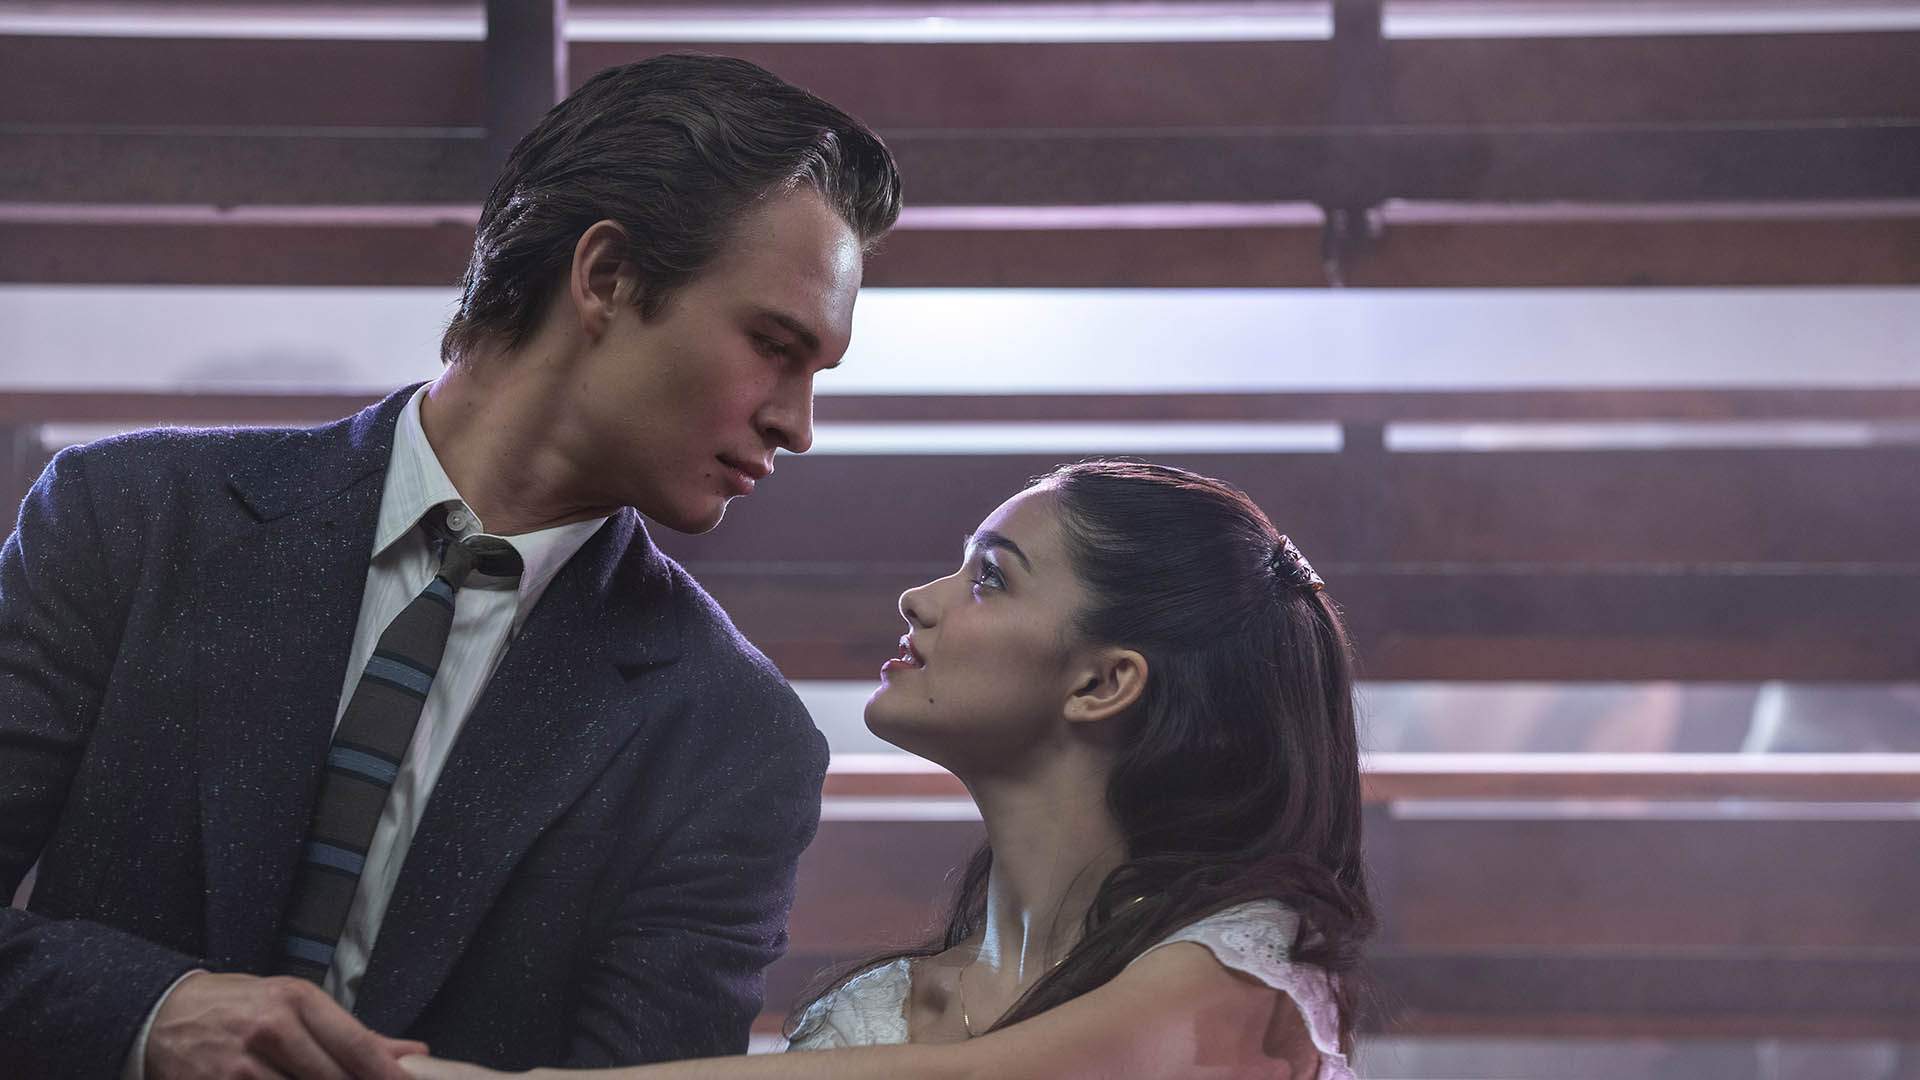 Steven Spielberg's Big-Screen 'West Side Story' Remake Has Just Dropped Its Full Trailer